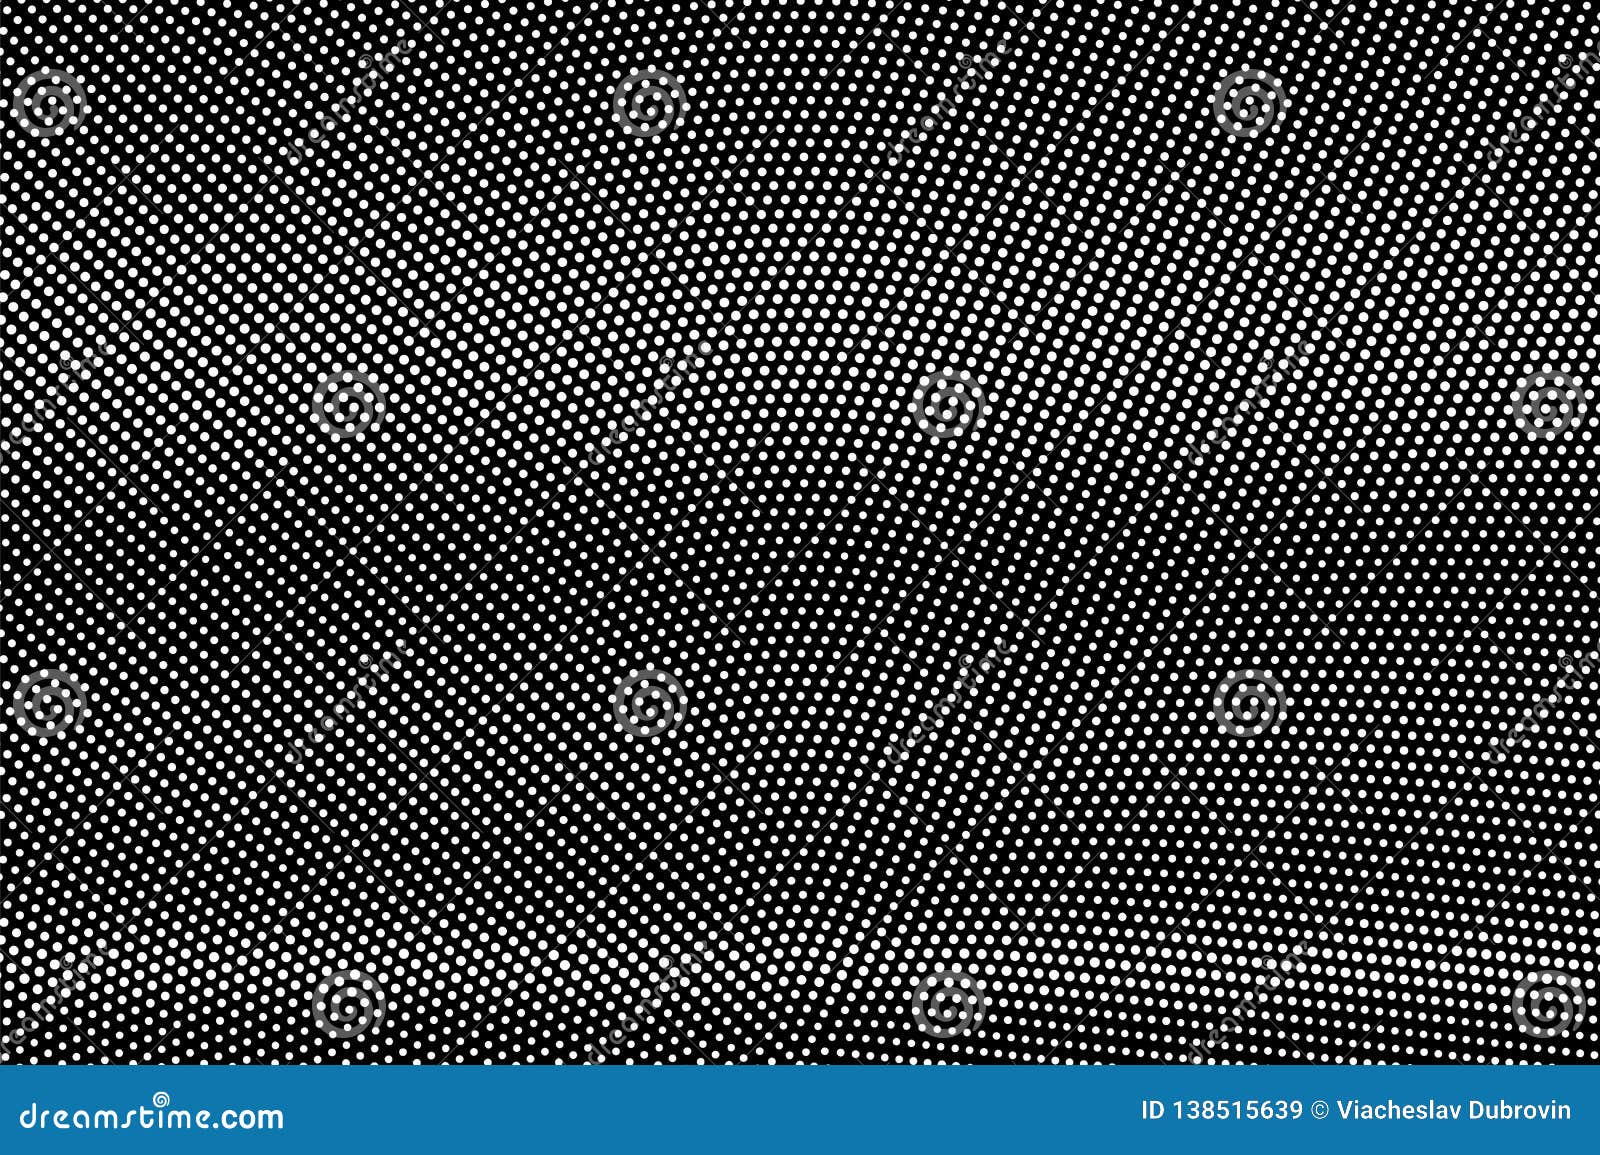 White Dots on Black Background. Frequent Small Halftone Vector Texture ...